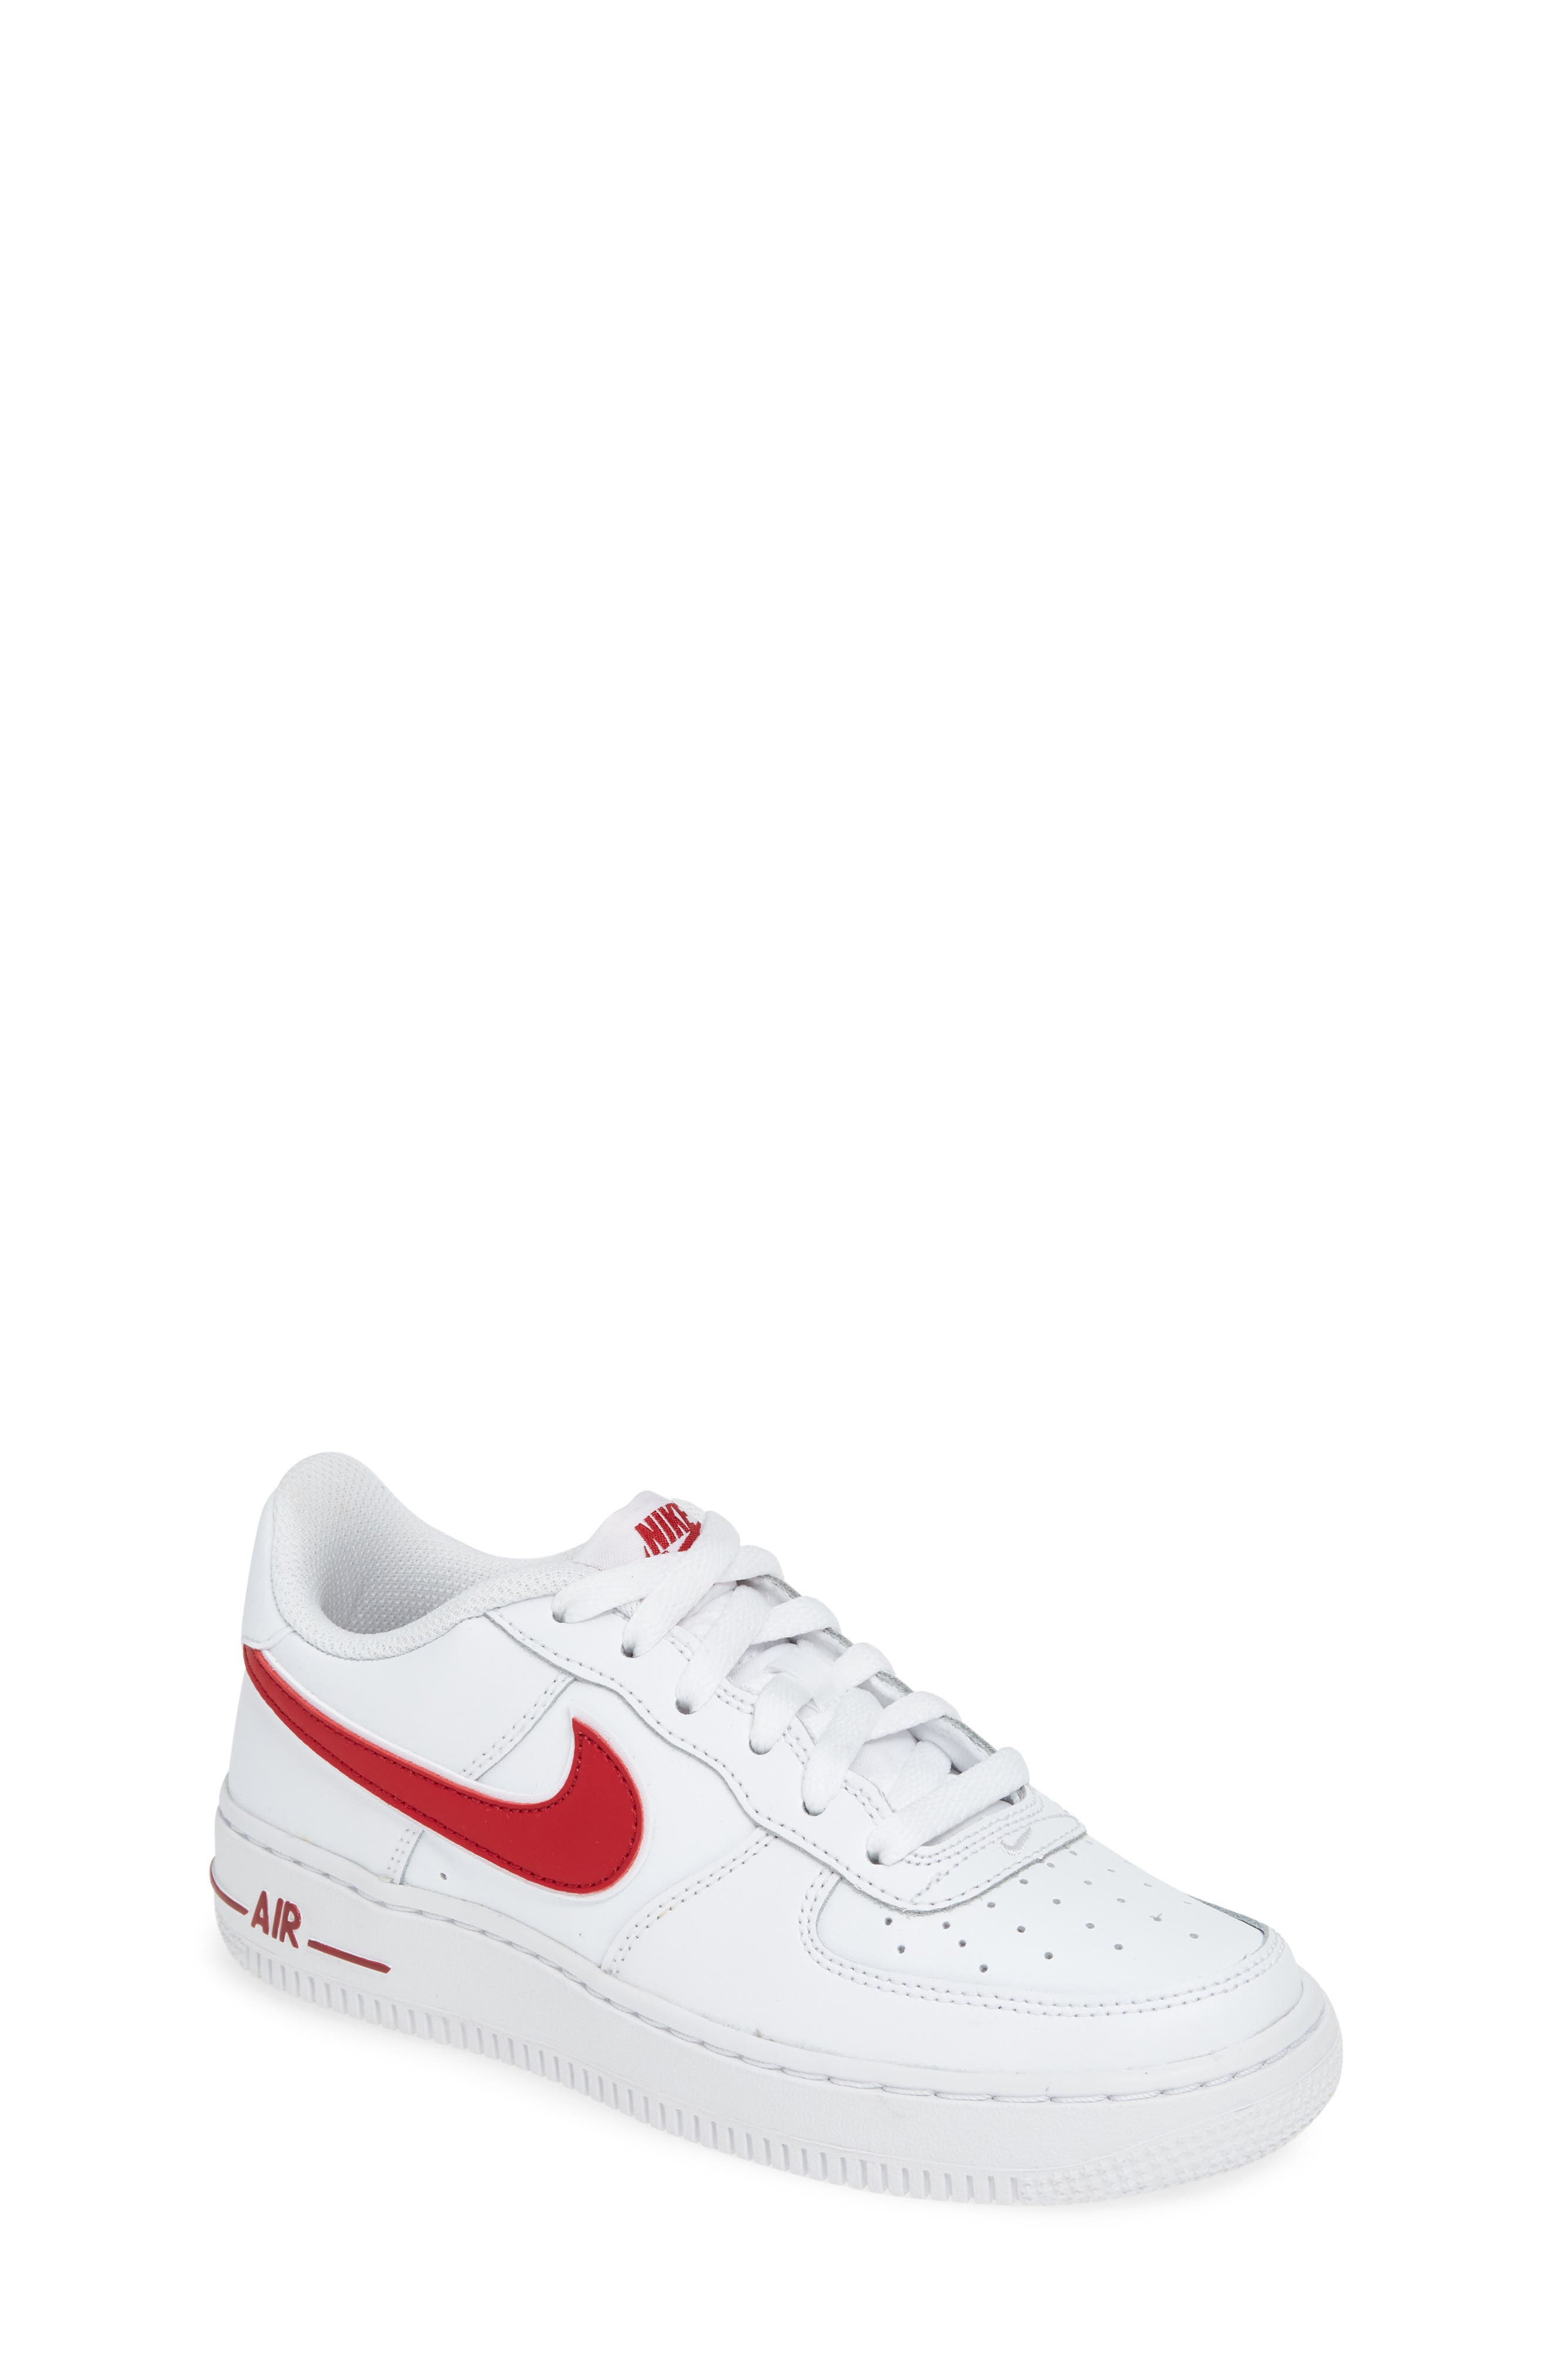 air force 1 kids red